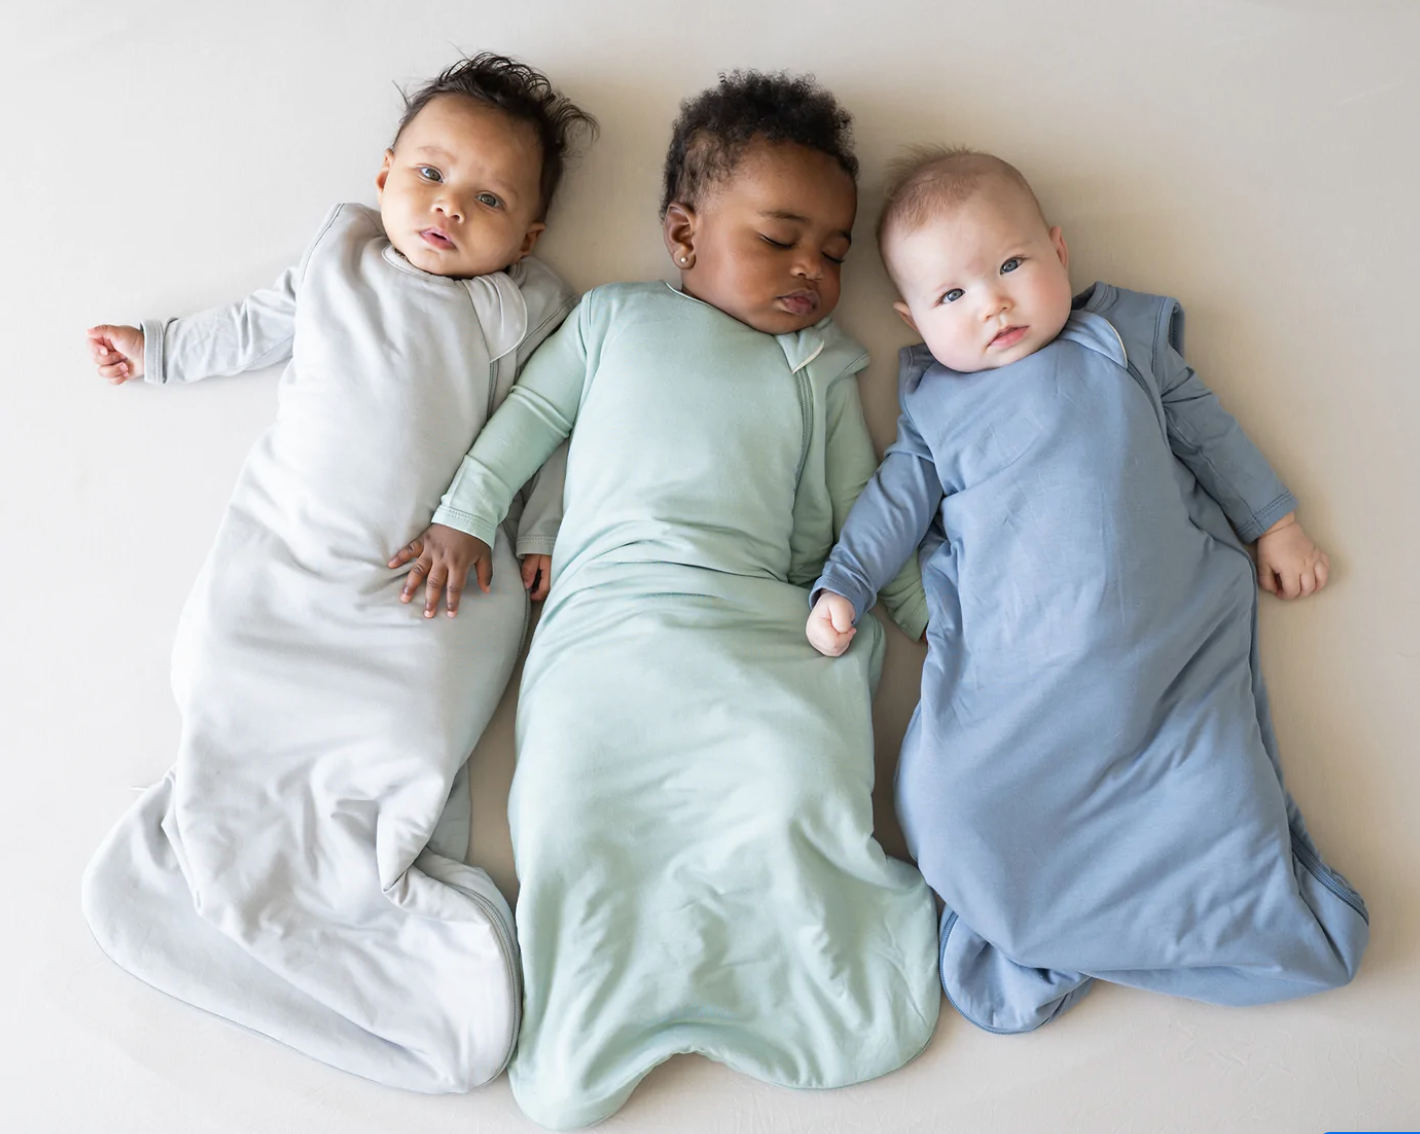 Sleeping bags help babies not trick up in the middle of the night prevent risk of sids